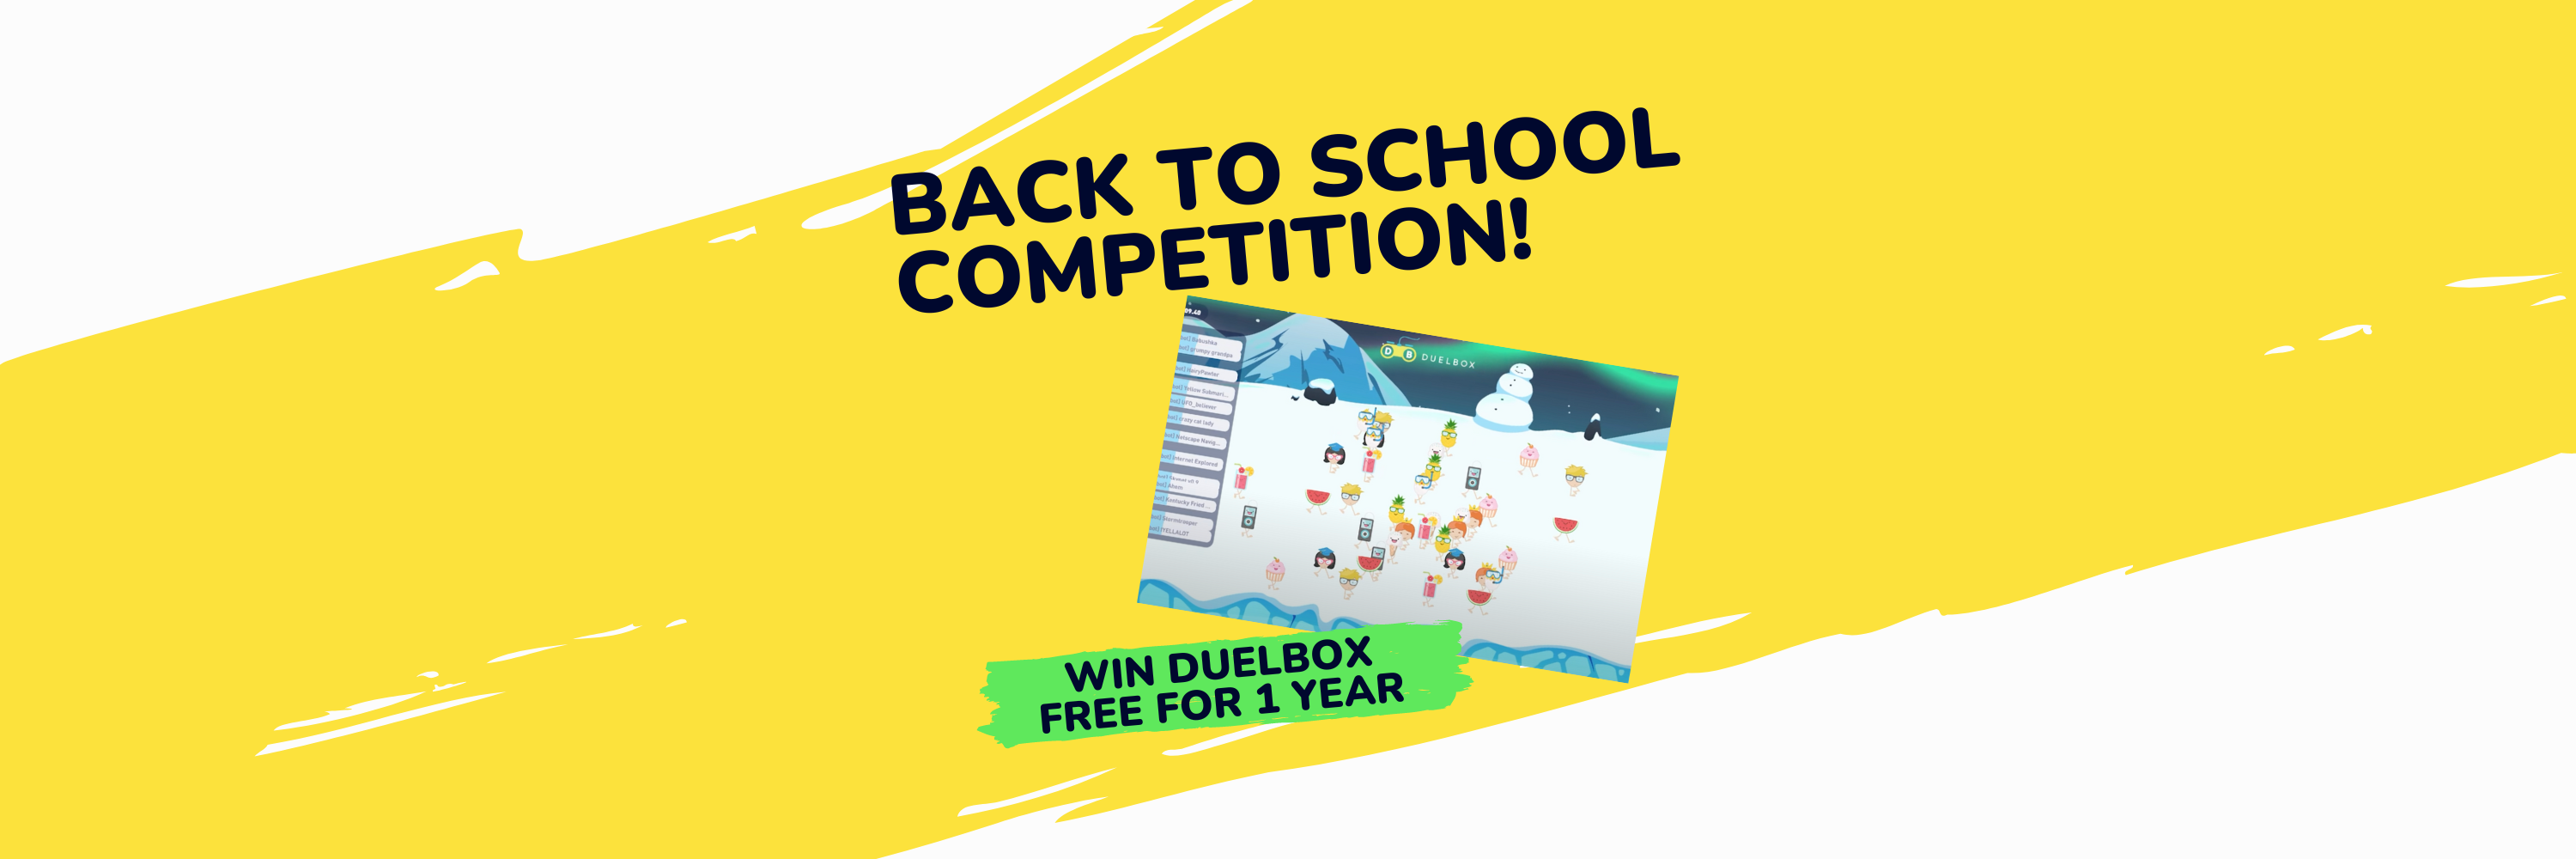 Back to school competition banner